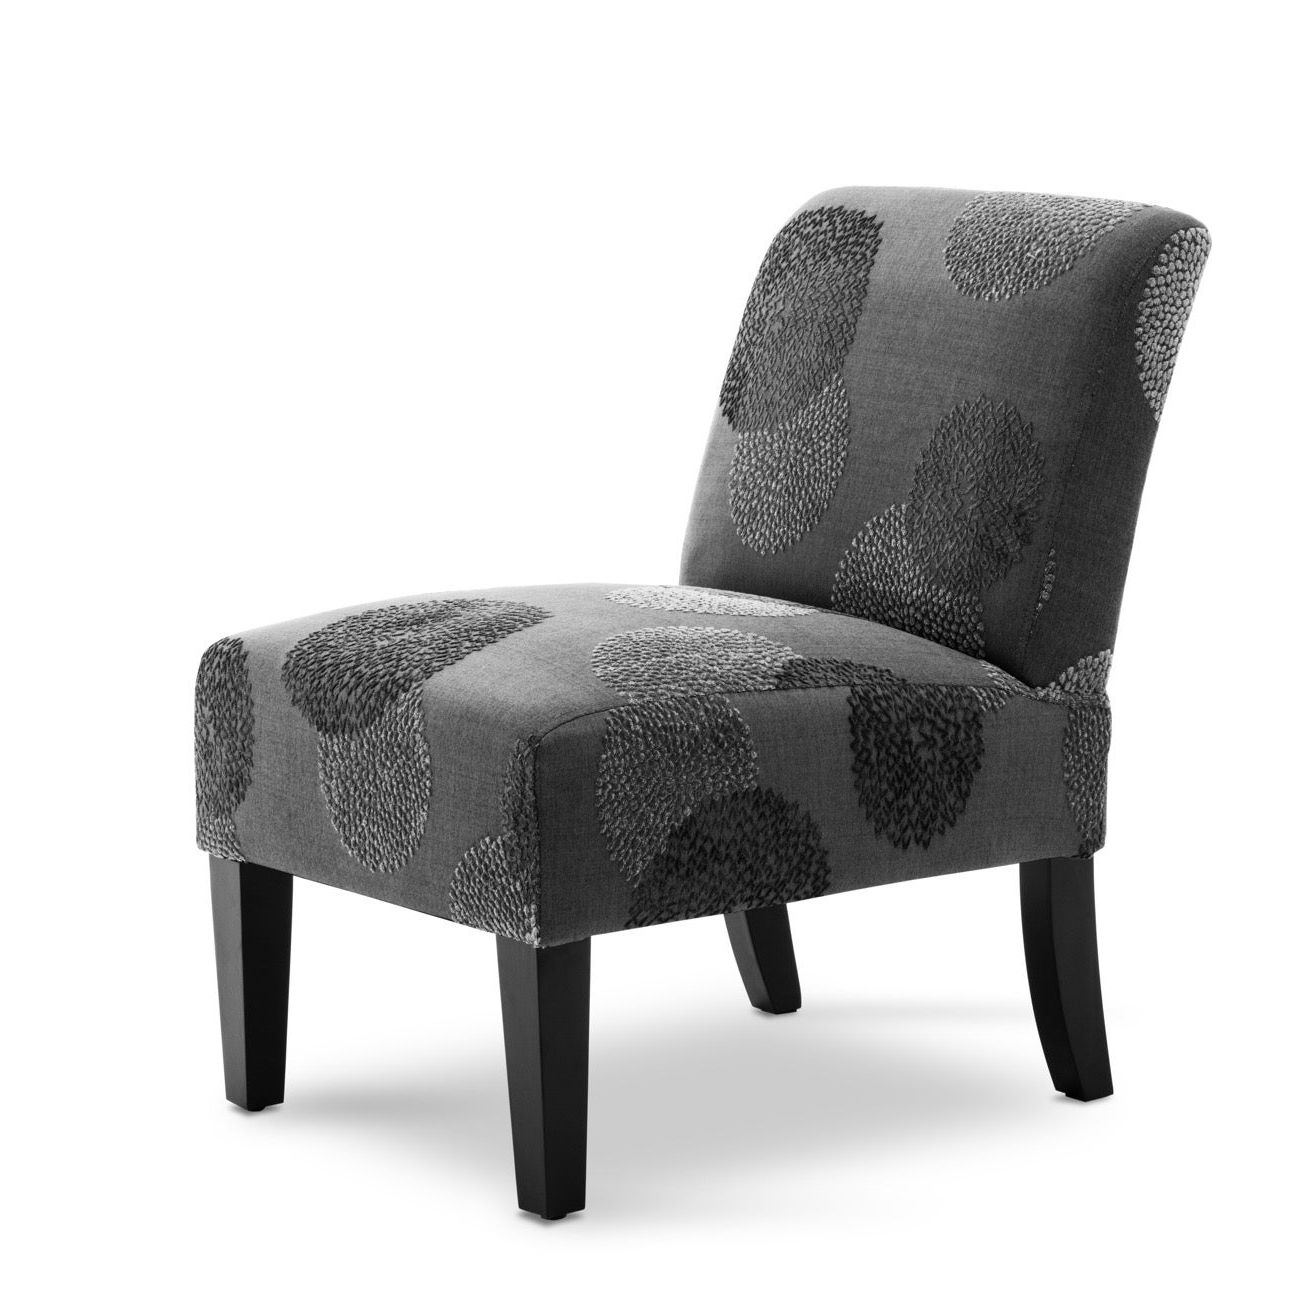 Armless Upholstered Slipper Chairs For Trendy Belleze Armless Contemporary Upholstered Single Curved Slipper Accent Chair  Living Room Bedroom (View 17 of 20)